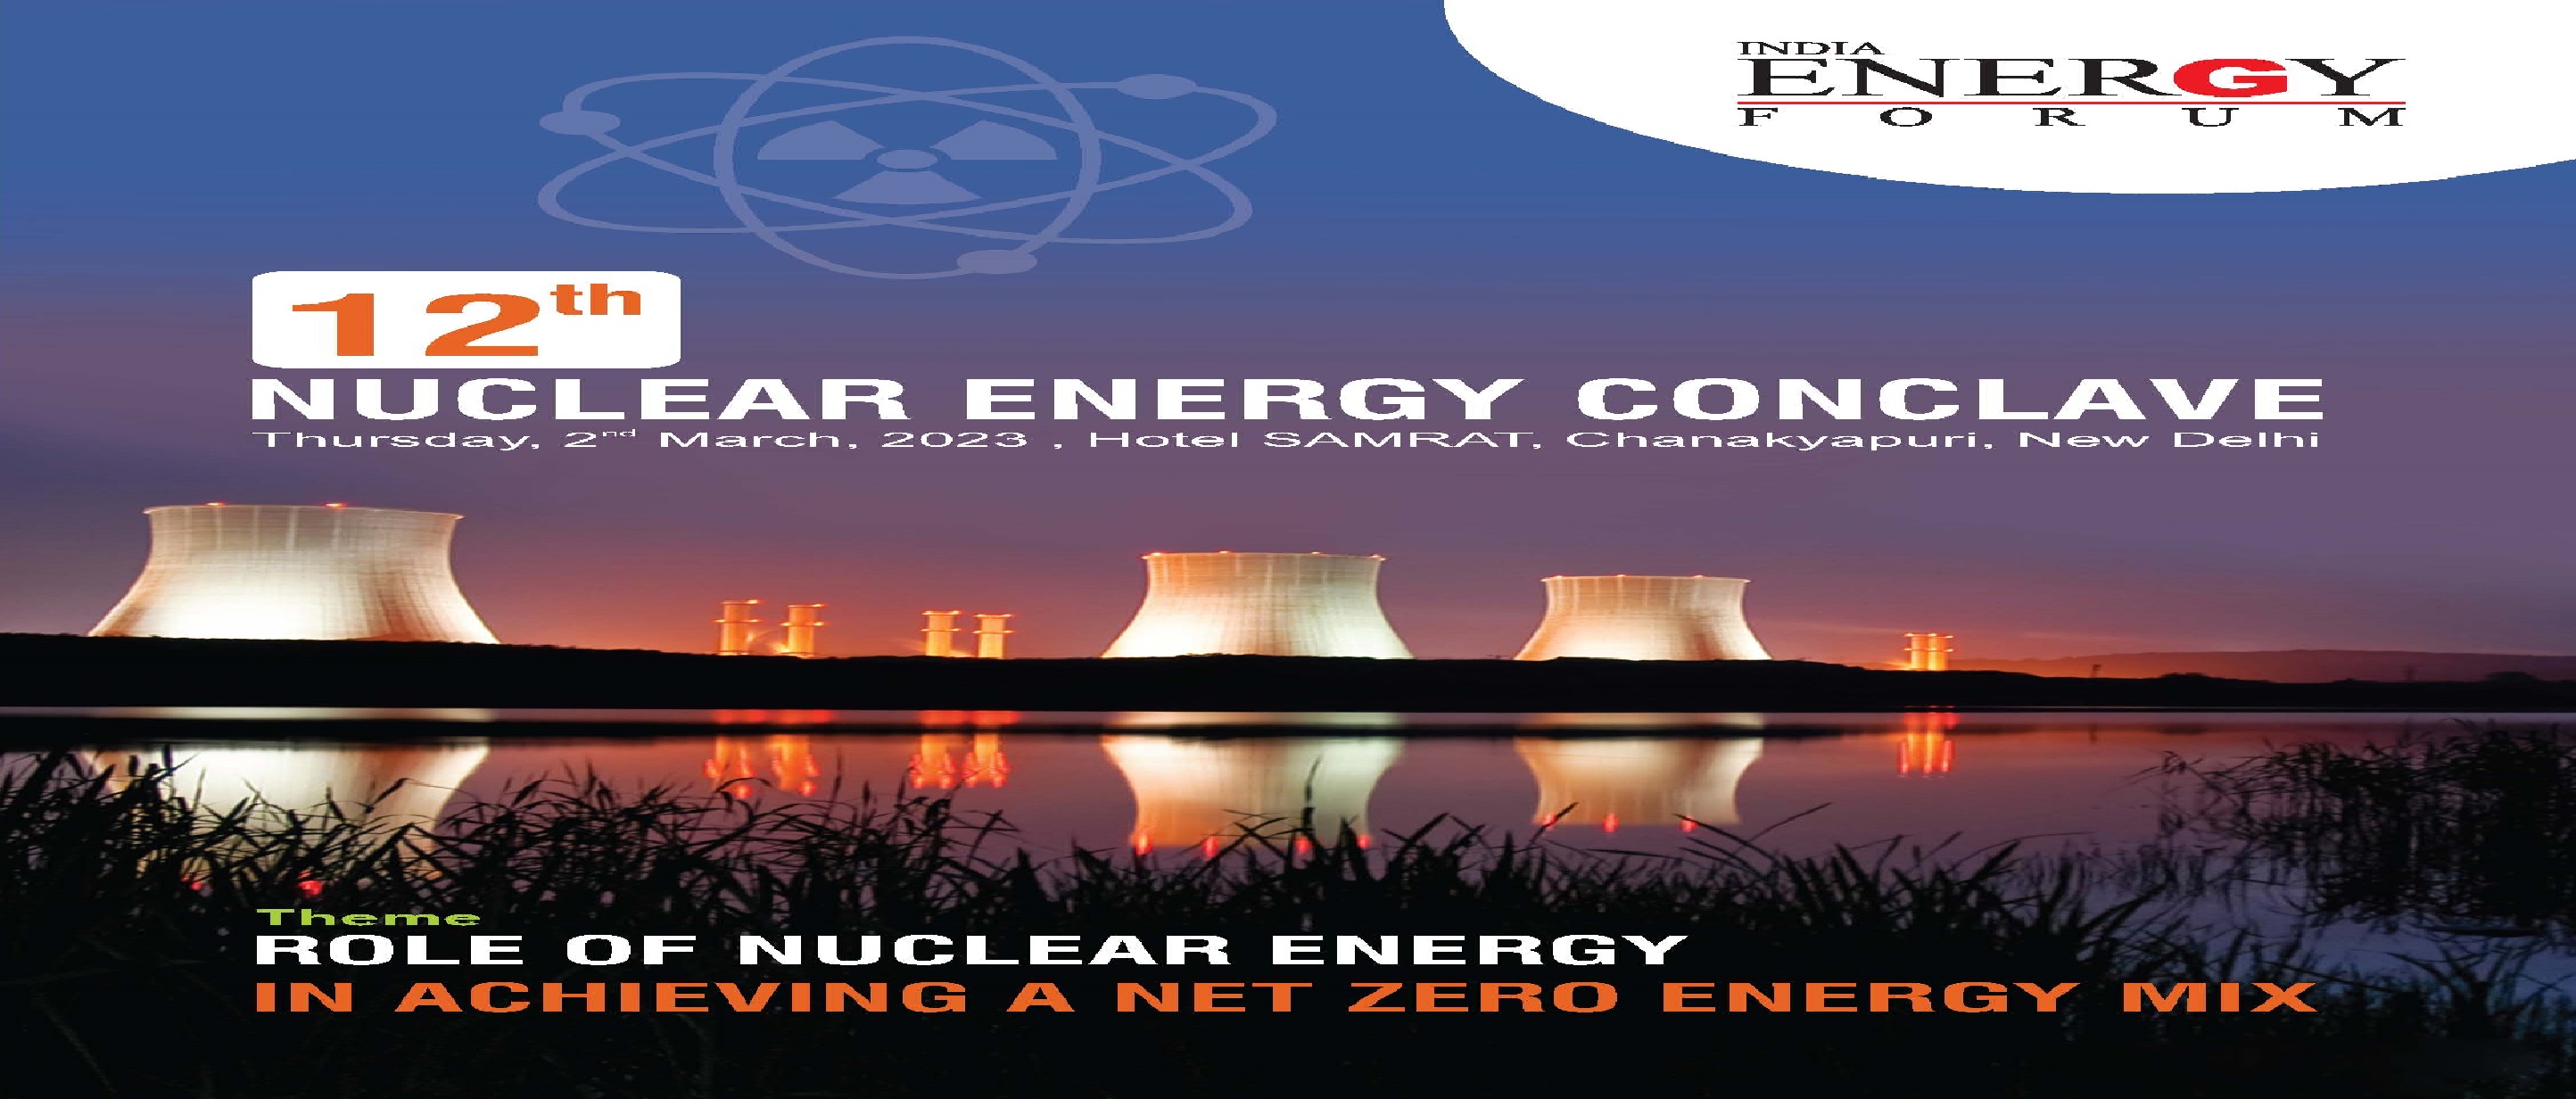 11th Nuclear Energy Conclave